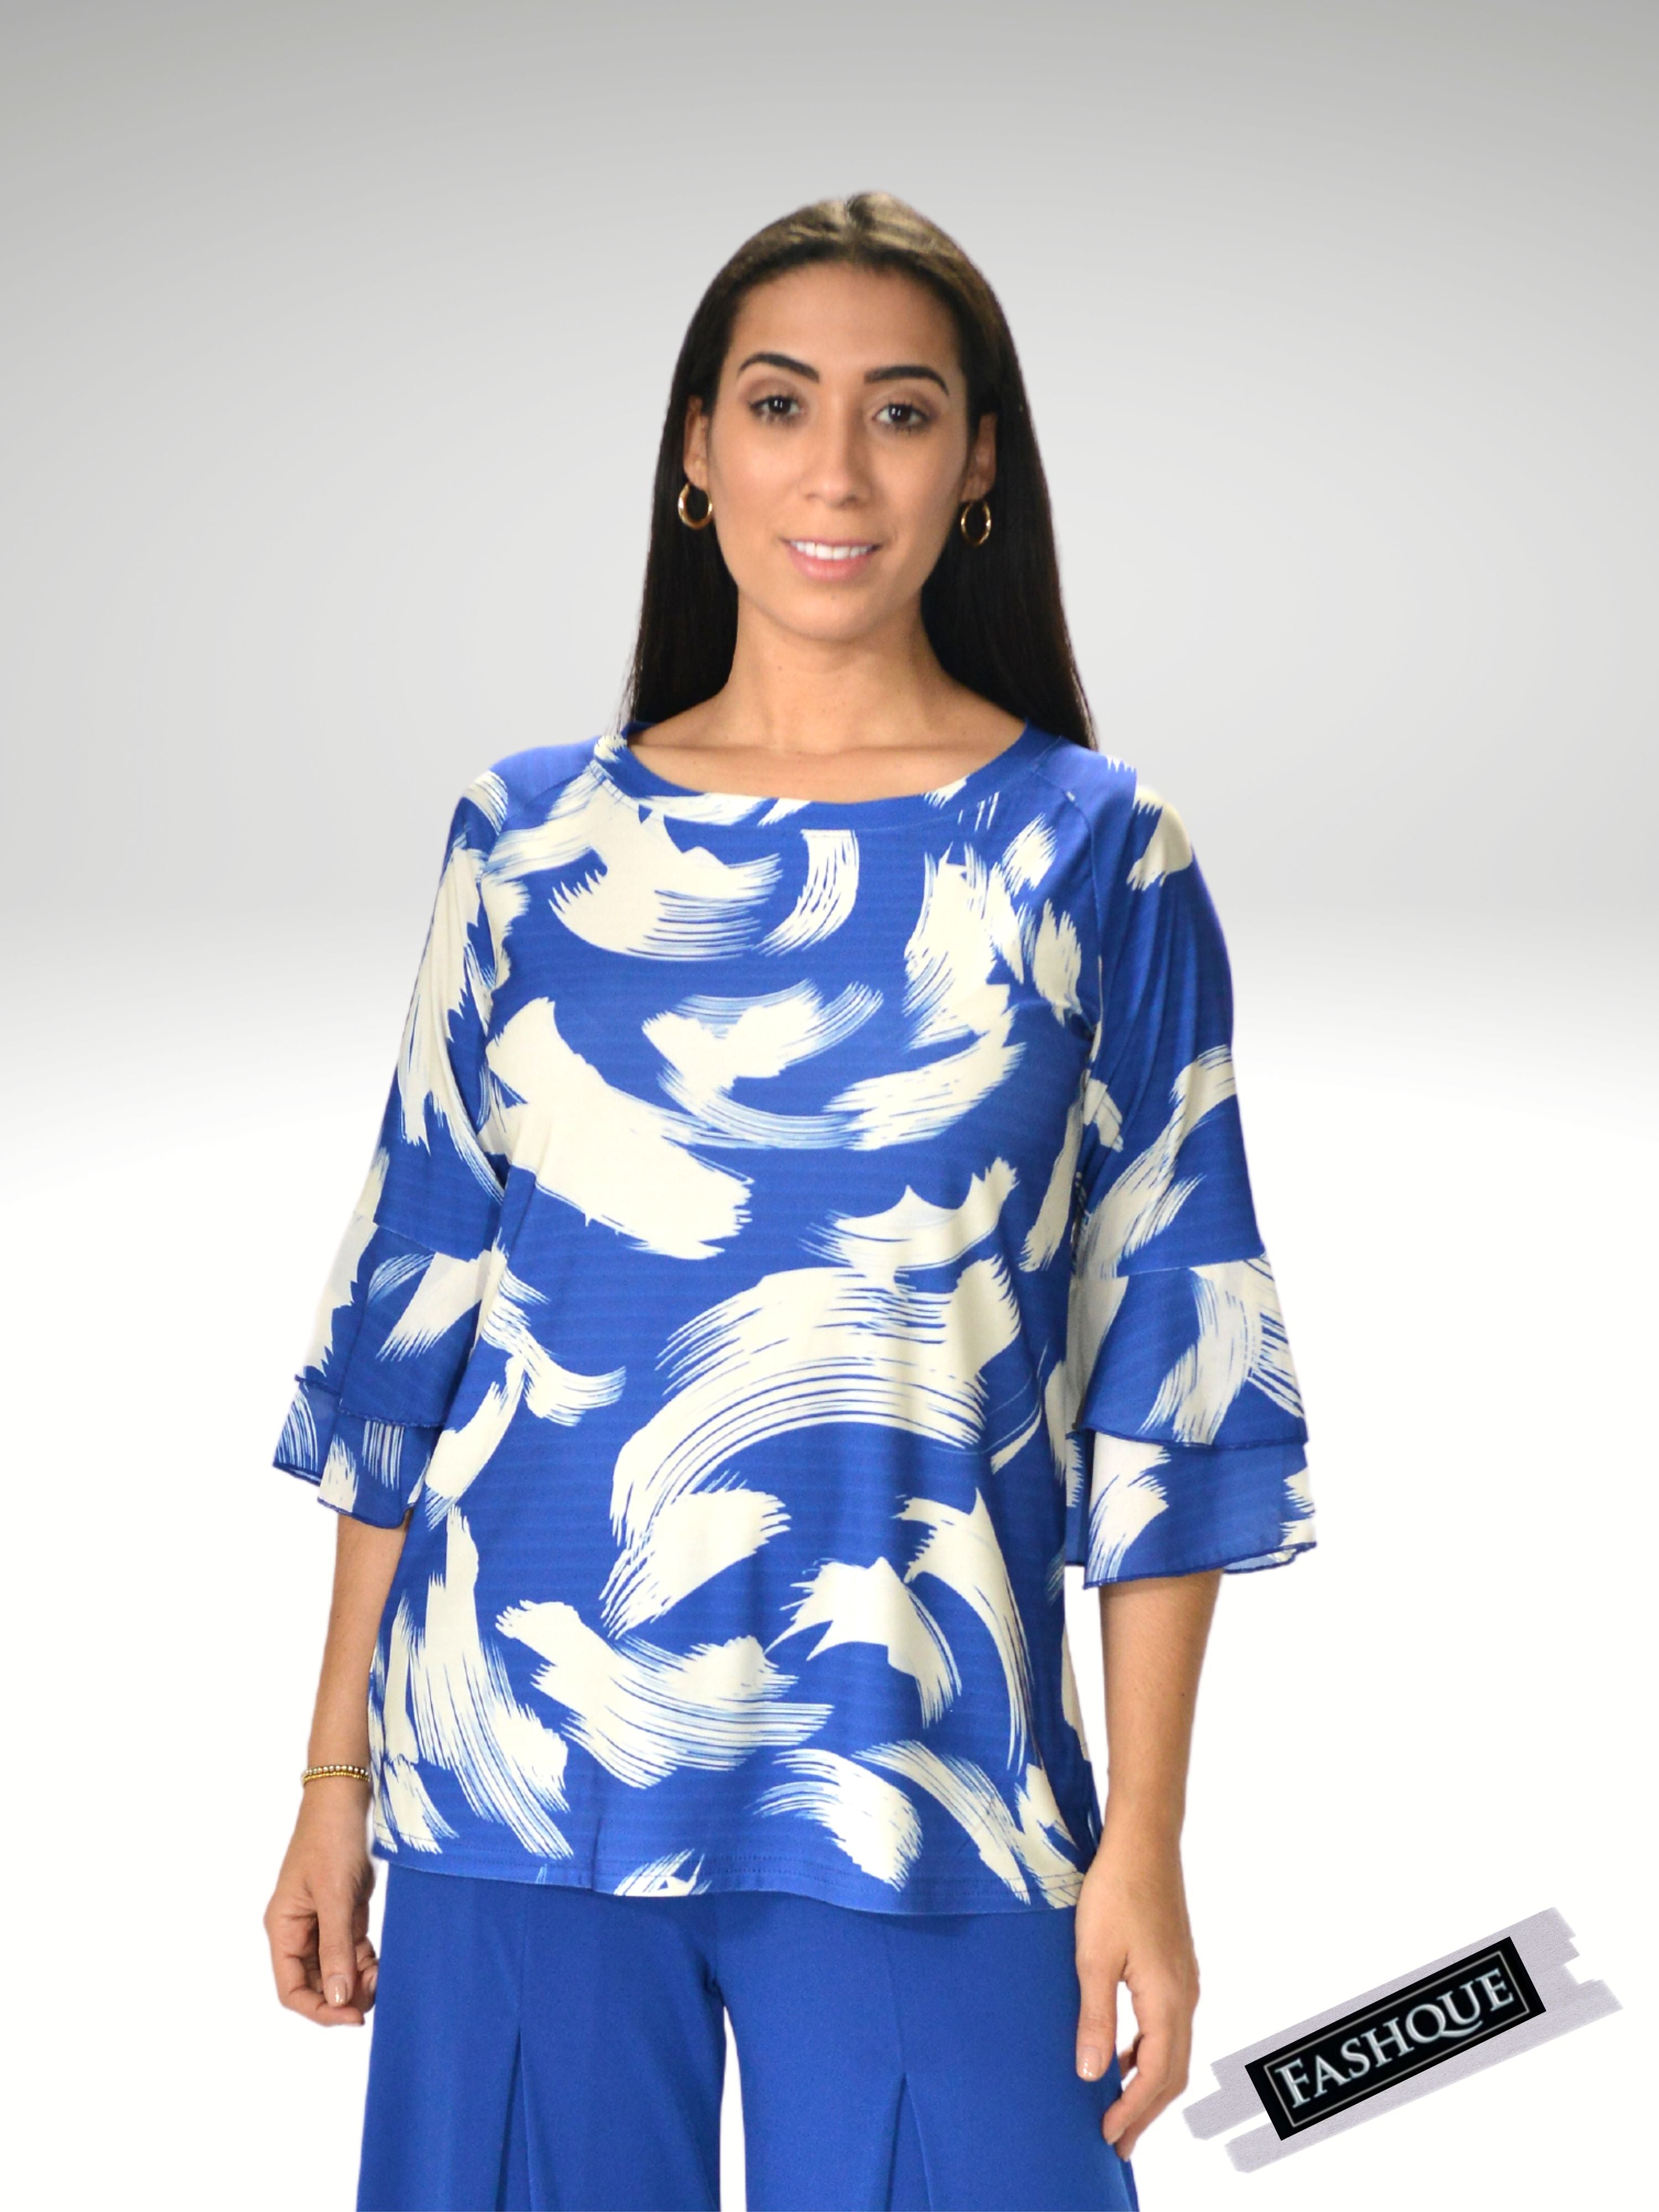 FASHQUE - DIGITAL PRINT BOAT NECK BELL SLEEVES TUNIC TOP - T1103